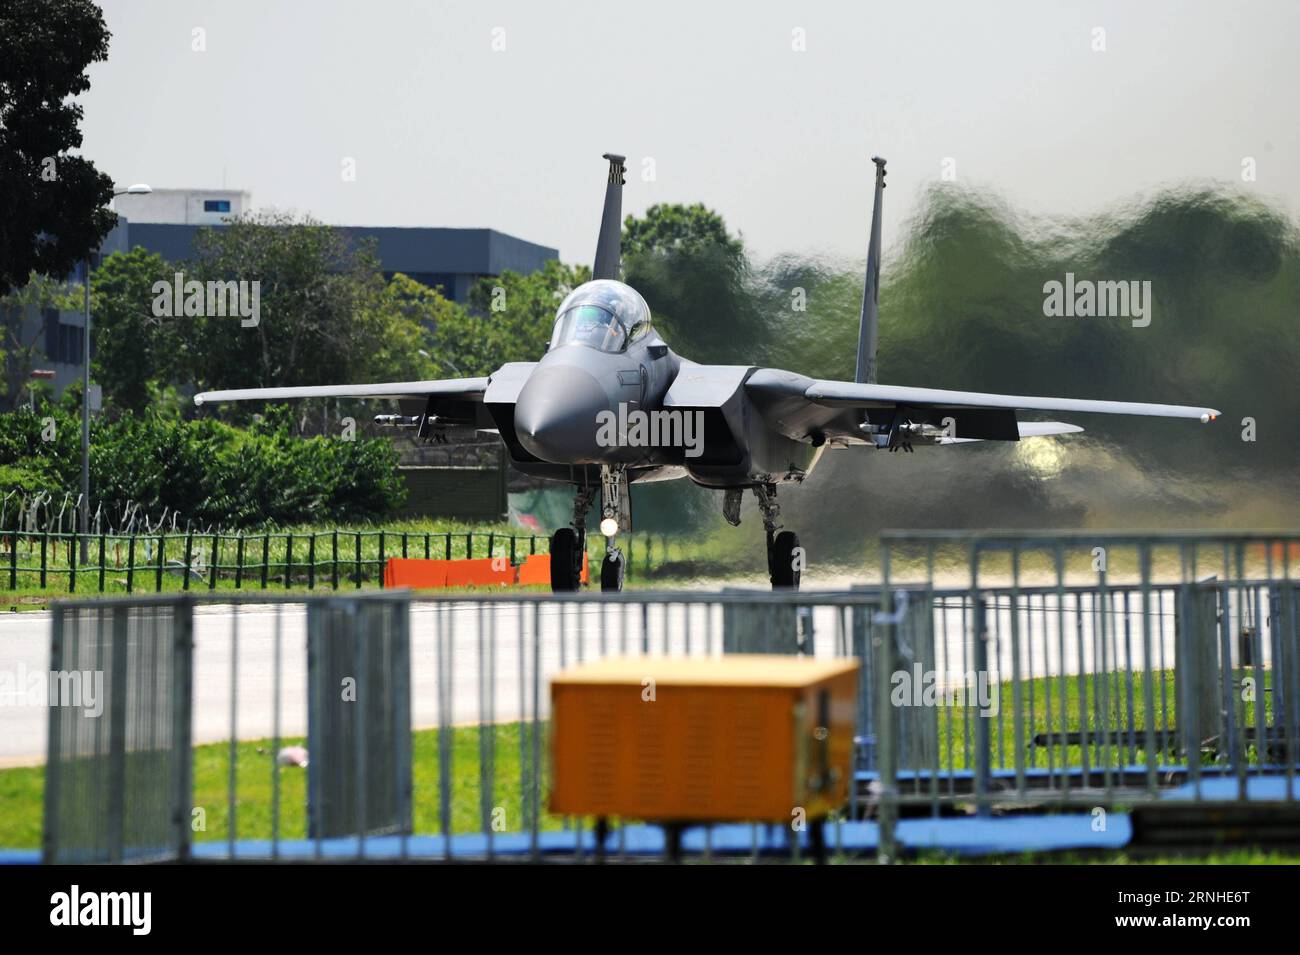 An F-15SG fighter plane of the Republic of Singapore Air Force (RSAF) prepares to take off during a rehearsal of exercise Torrent on Singapore s Lim Chu Kang road, Nov. 12, 2016. The Republic of Singapore Air Force (RSAF) Sunday conducted exercise Torrent, in which a public road was converted into a runway for aircraft take-off and landing. The alternate runway exercise, which was last conducted in 2008 and now is in its seventh edition, aims to increase RSAF s aircraft take-off and landing capability. ) (sxk) SINGAPORE-RSAF-EXERCISE TORRENT-REHEARSAL ThenxChihxWey PUBLICATIONxNOTxINxCHN   to Stock Photo